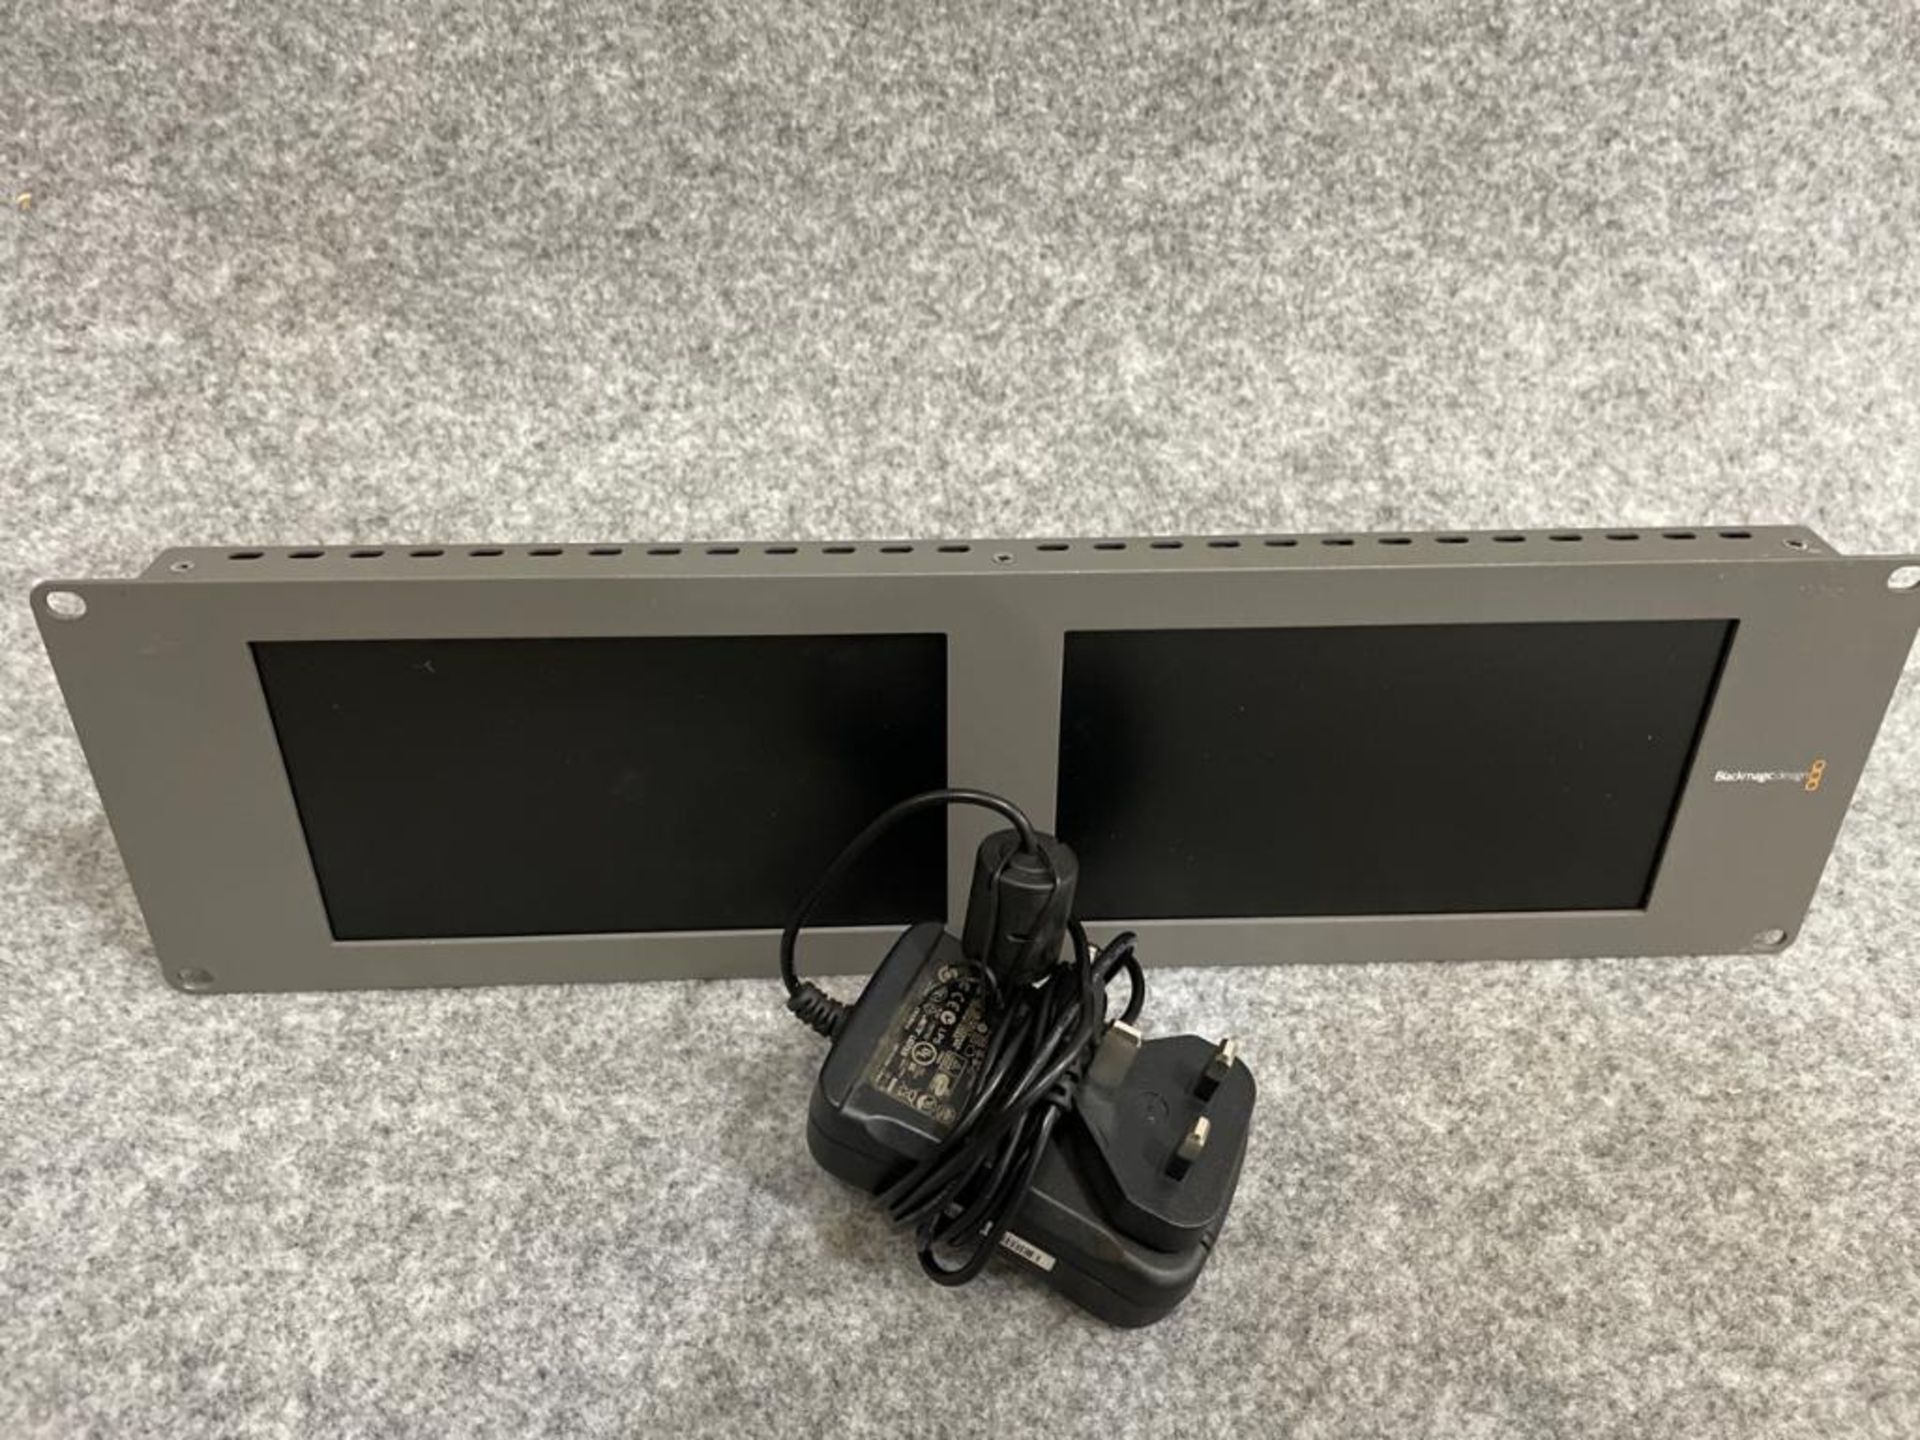 BlackMagic Dual HD Monitor with power supply SN: 1391918 - Image 3 of 3